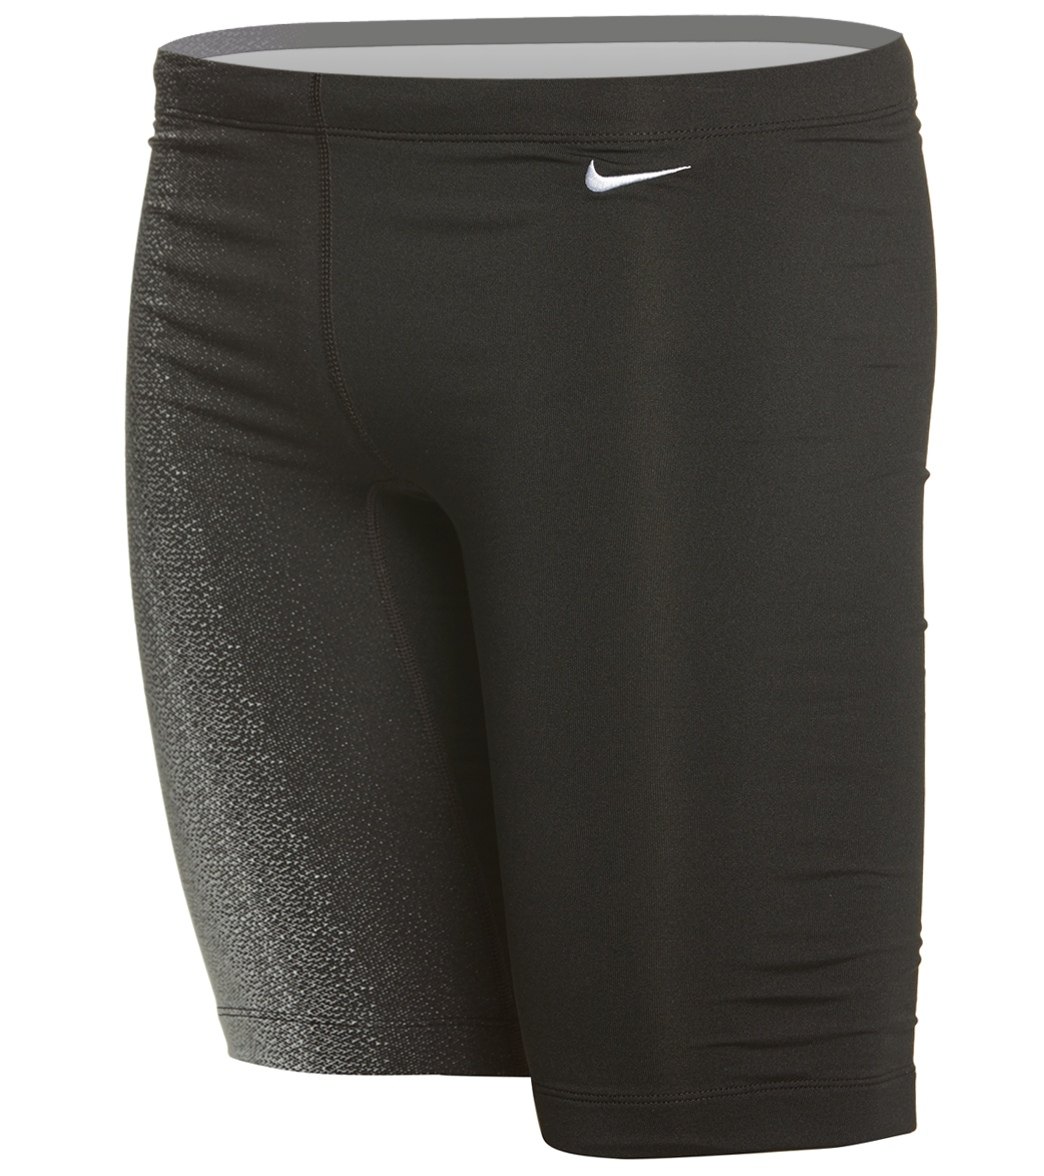 Nike Men's Fade Sting Jammer Swimsuit - Black 26 Polyester/Spandex - Swimoutlet.com